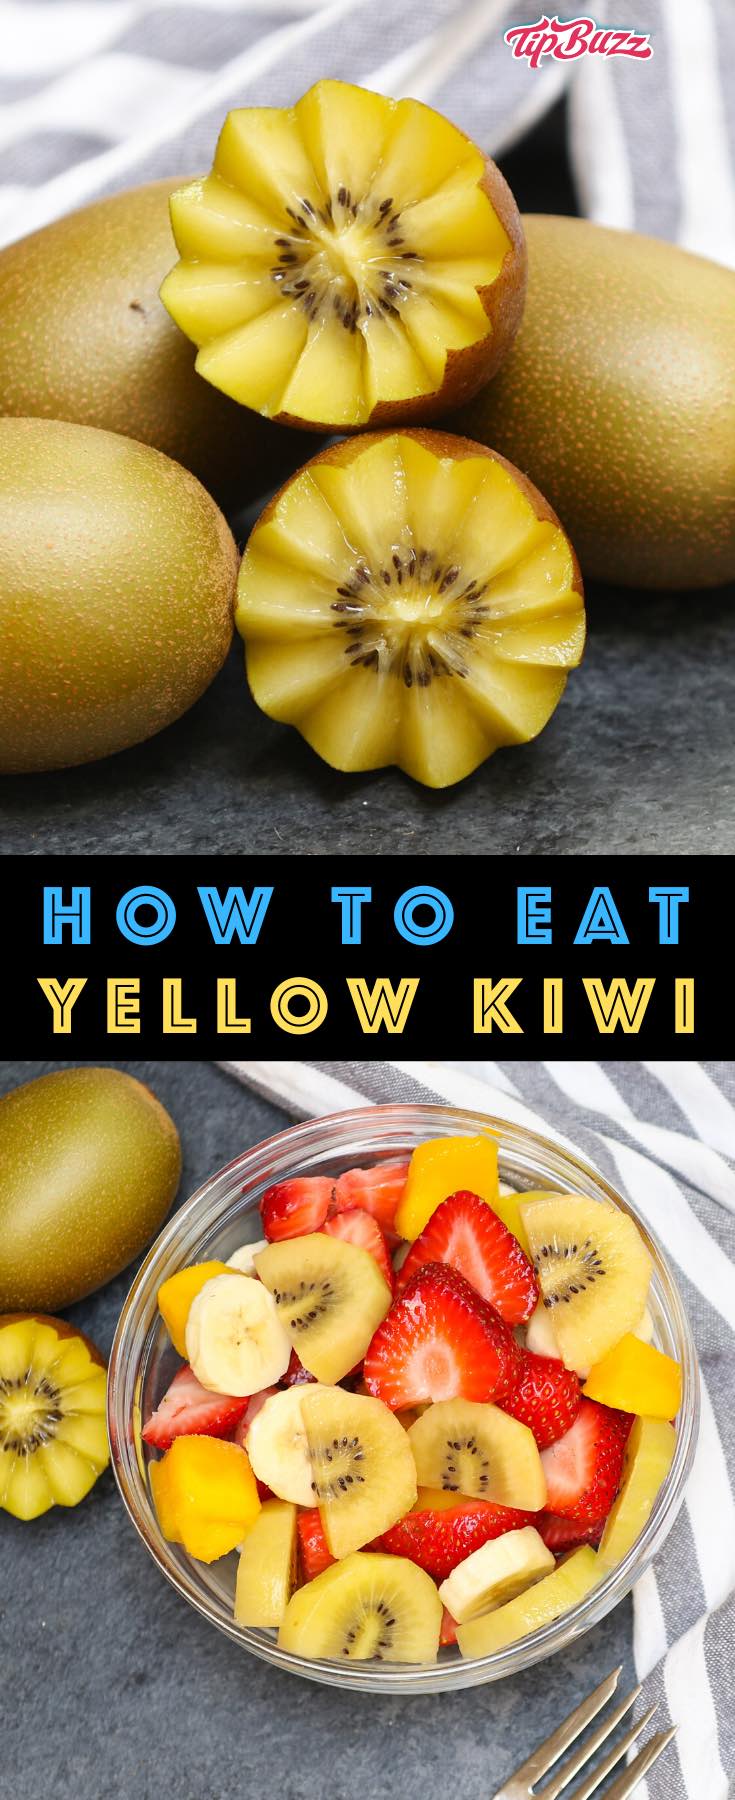 Golden Kiwi Fruit or Yellow Kiwi is a delicious tropical fruits with sweeter flesh and smoother skin than green kiwis. They're known as Zespri SunGolds and can be used in recipes for fruit salads and smoothes. #goldenkiwi #yellowkiwi 